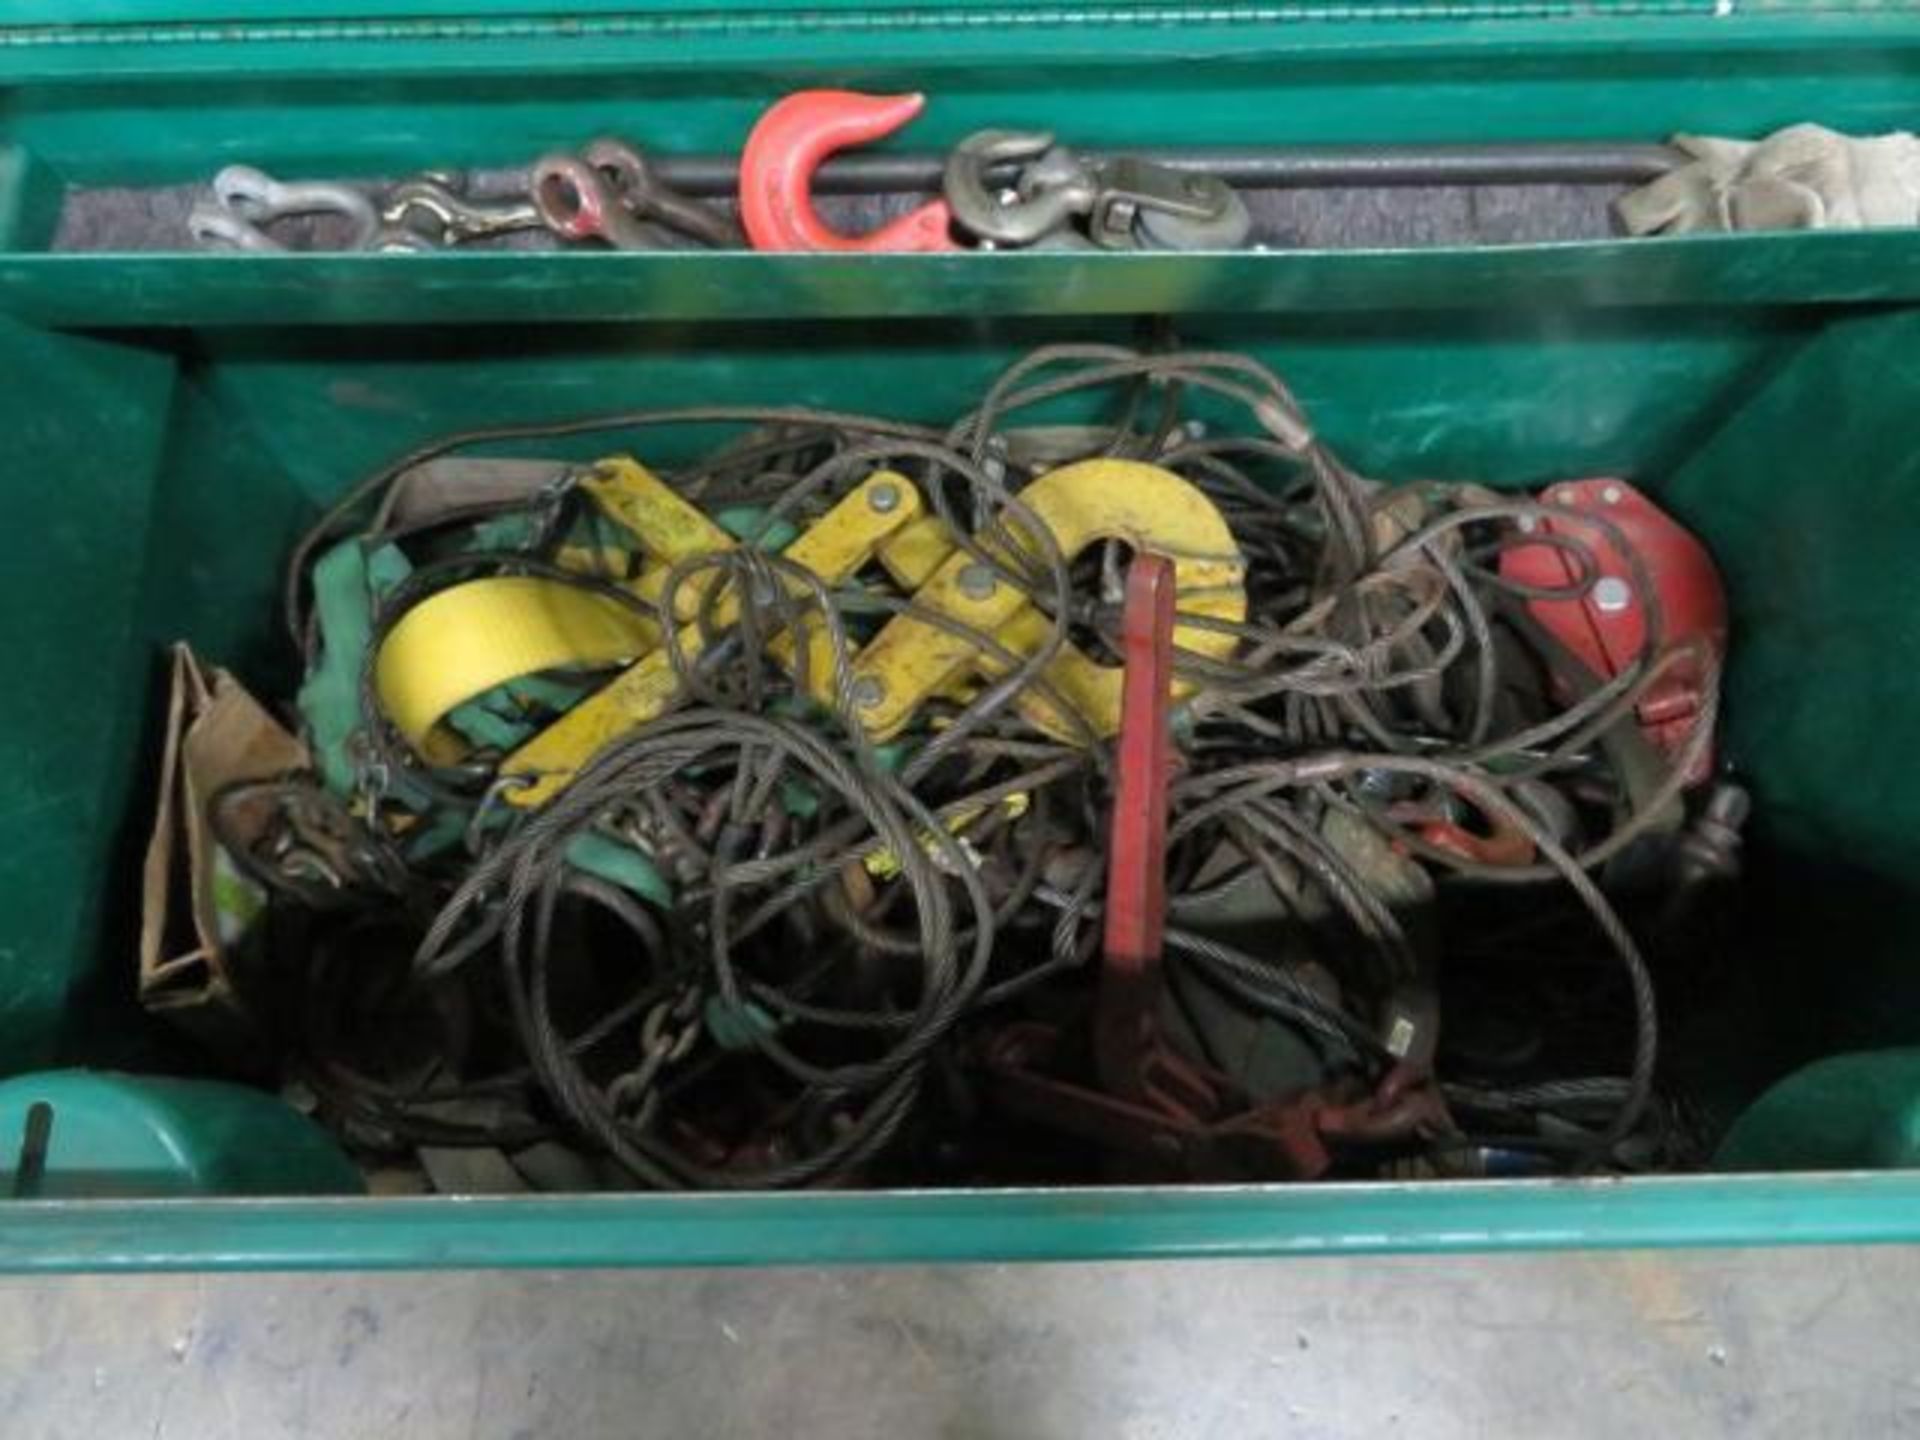 LOT: Greenlee Portable Storage Box No. 2448 with Contents of Lifting Accessories including Cable, - Image 2 of 3